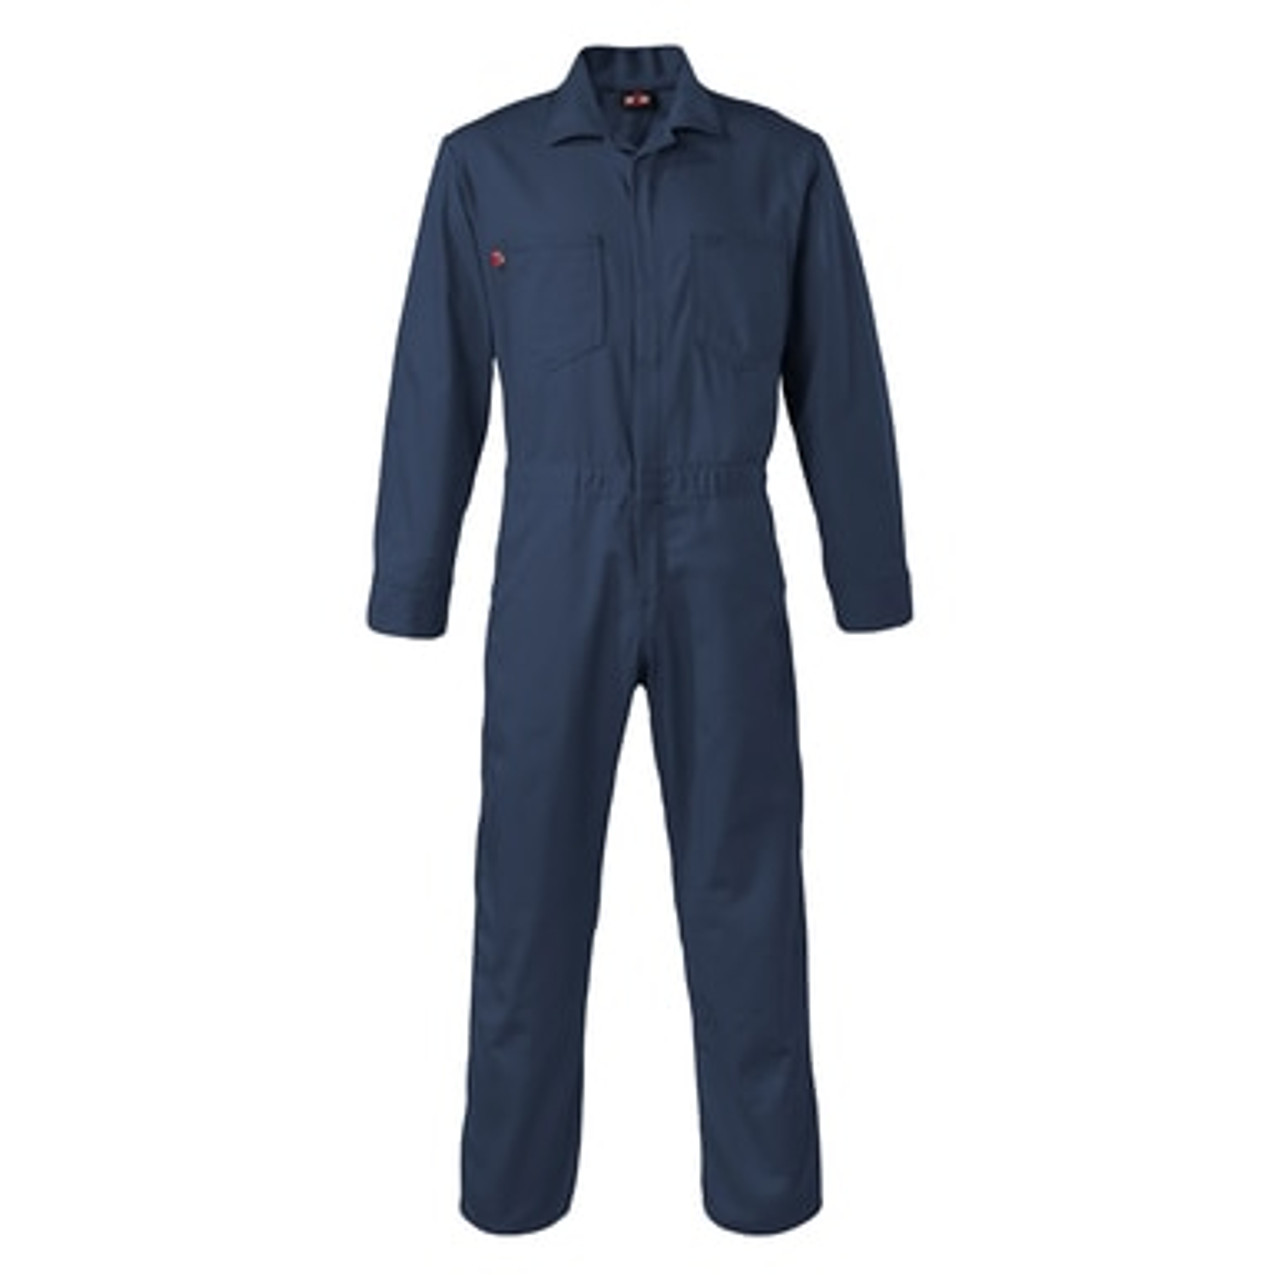 Saf-Tech Nomex 4.5 oz FR Navy Contractor Coverall CJS1525